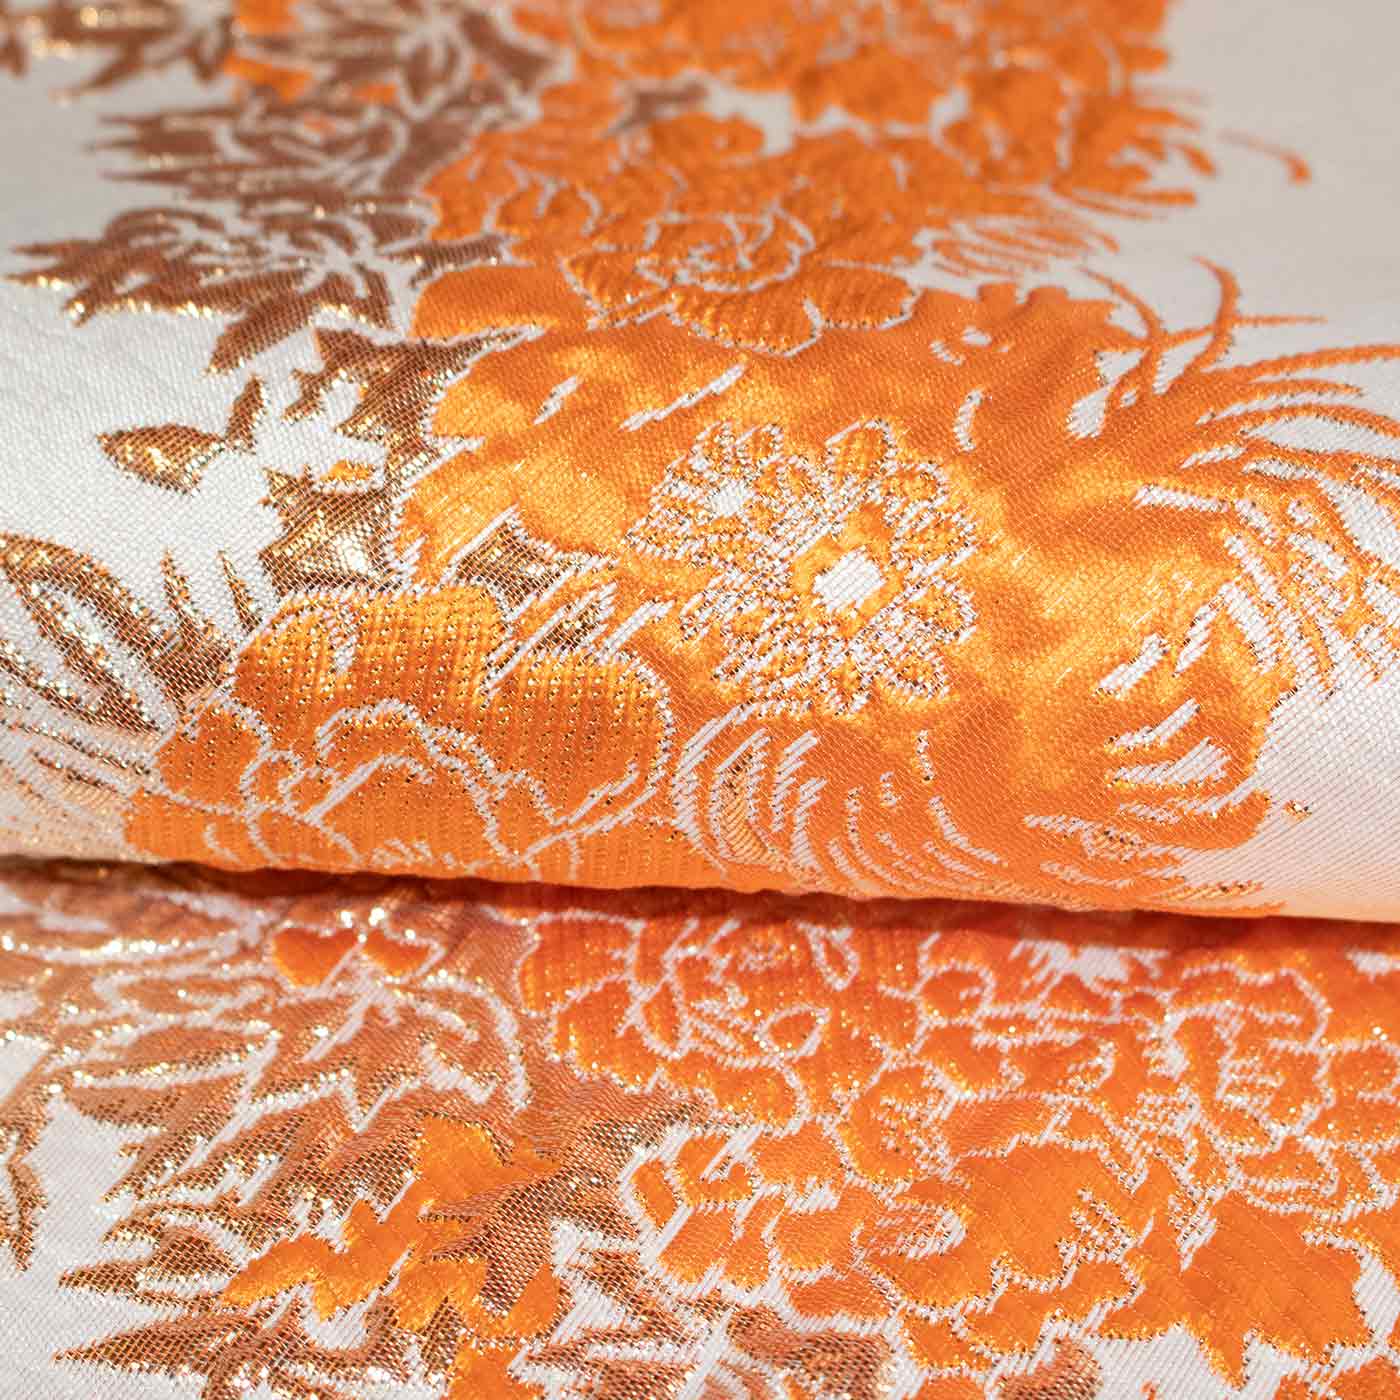 Orange and Gold Abstract Floral Brocade Fabric